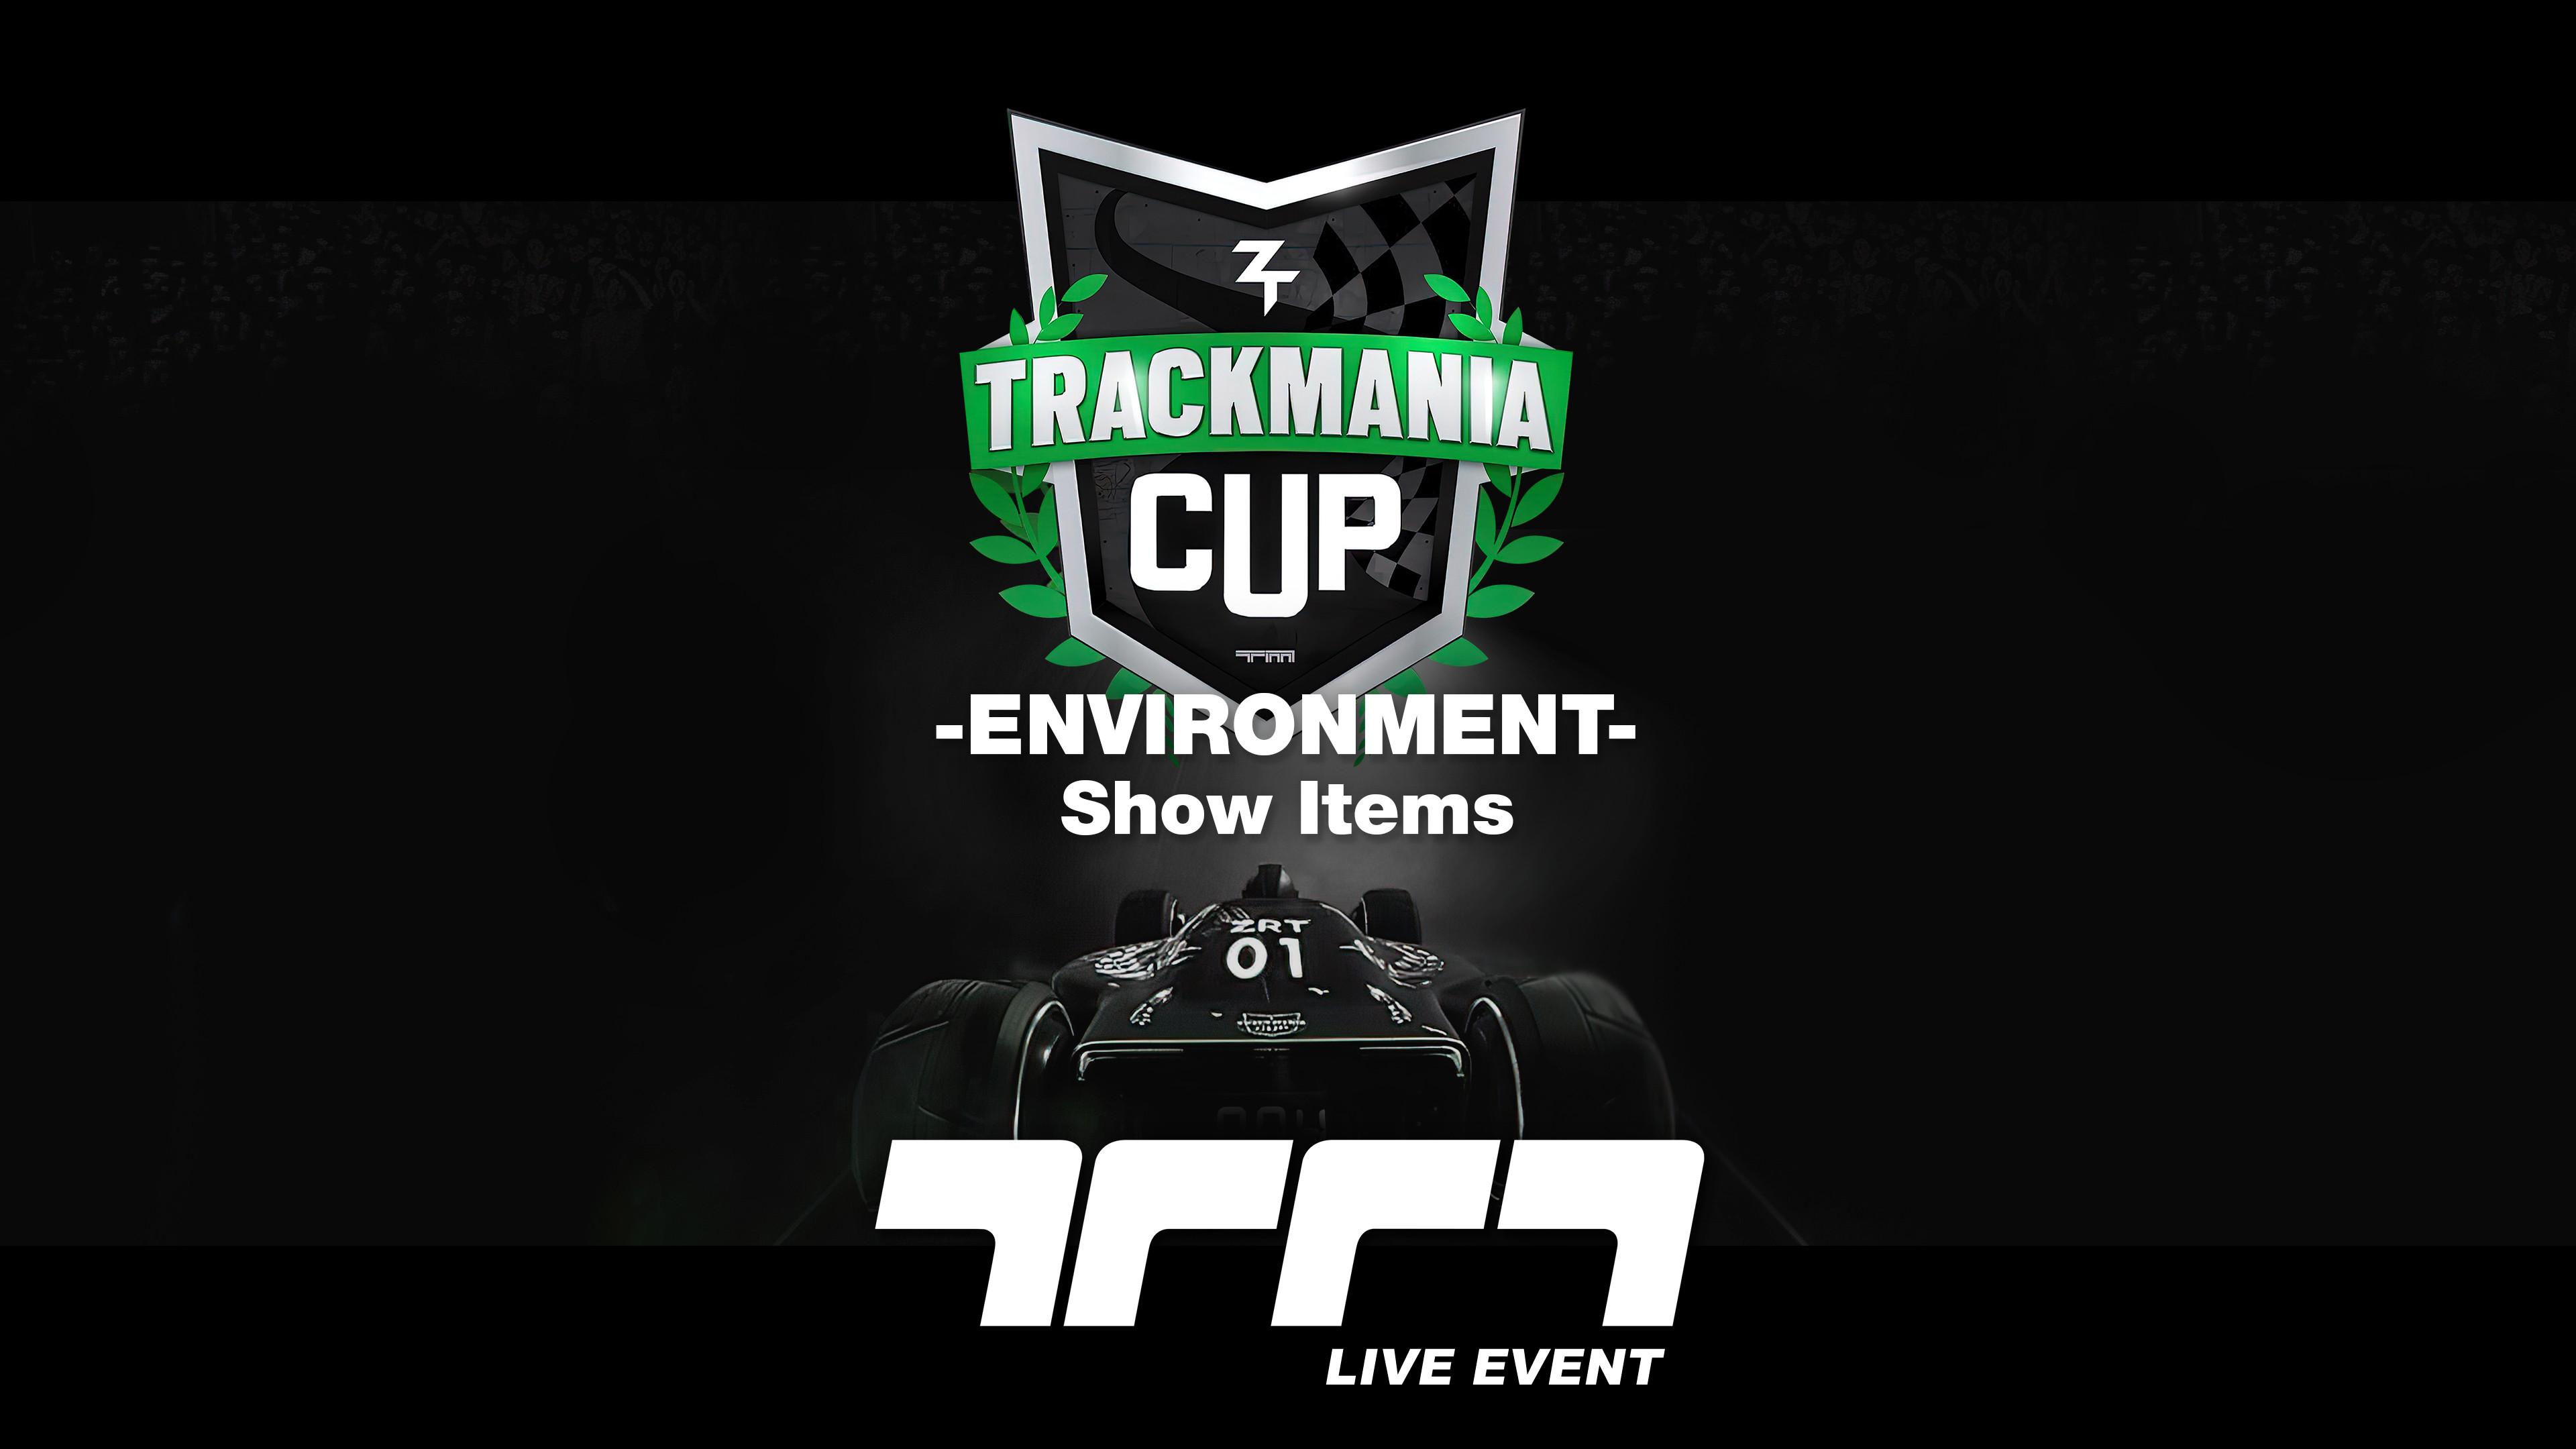 Trackmania Cup was a Live Event organised the 4th June 2022, in Paris Zenith "Accor Arena". For that event i created a lot of items.